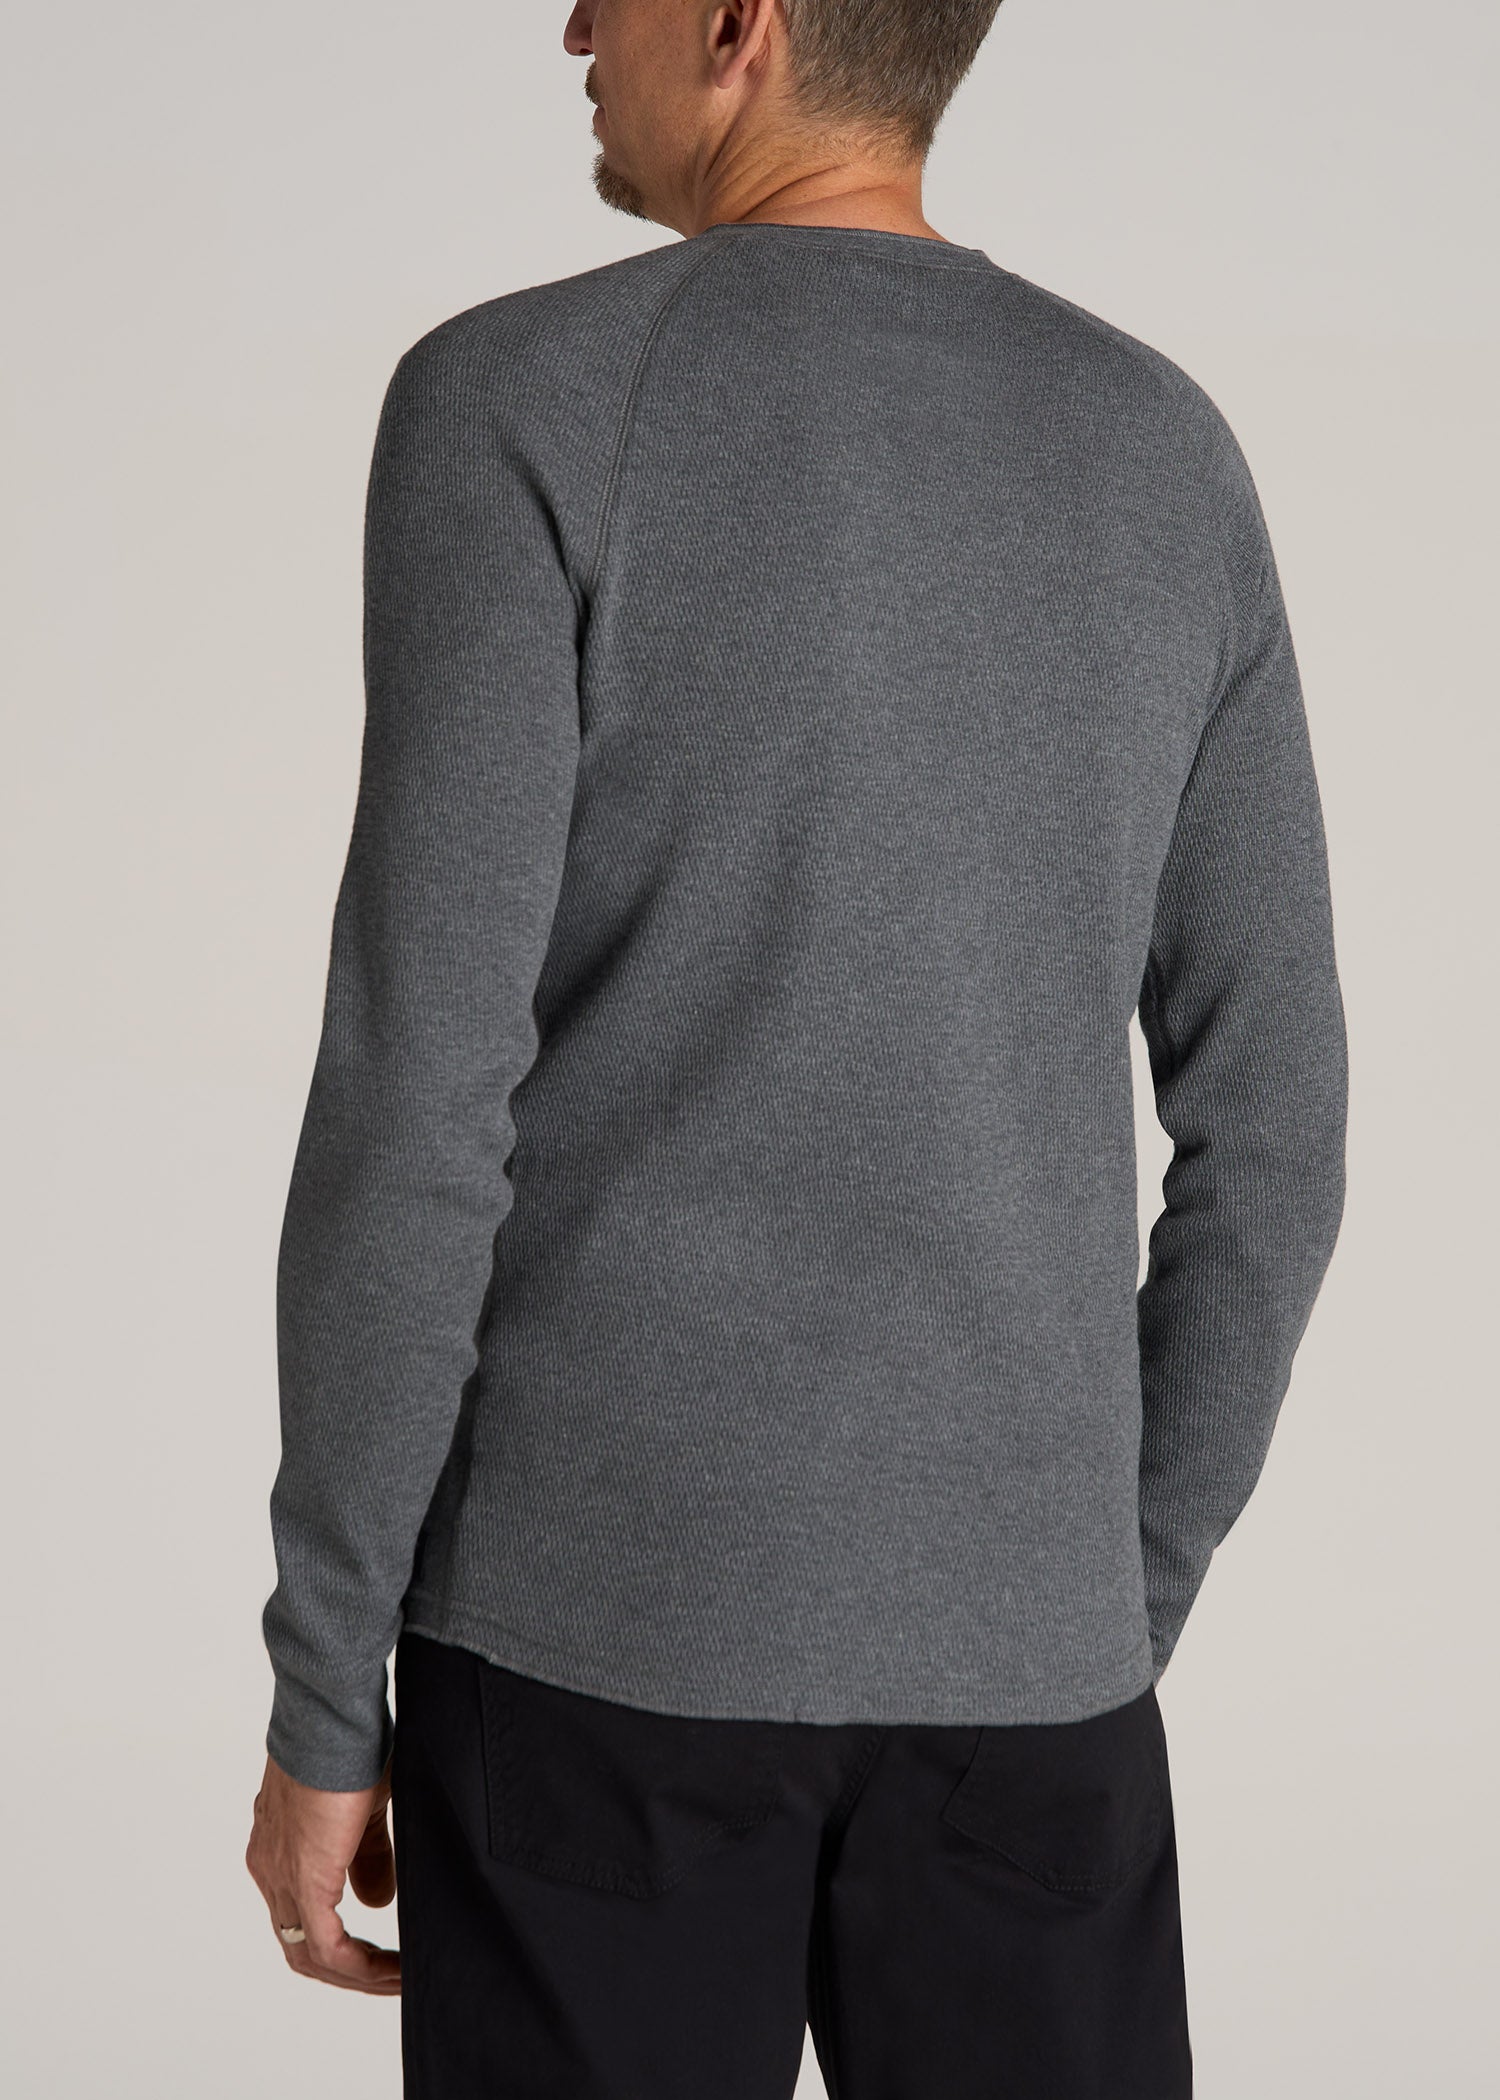 Double Honeycomb Thermal Long-Sleeve Henley Shirt for Tall Men